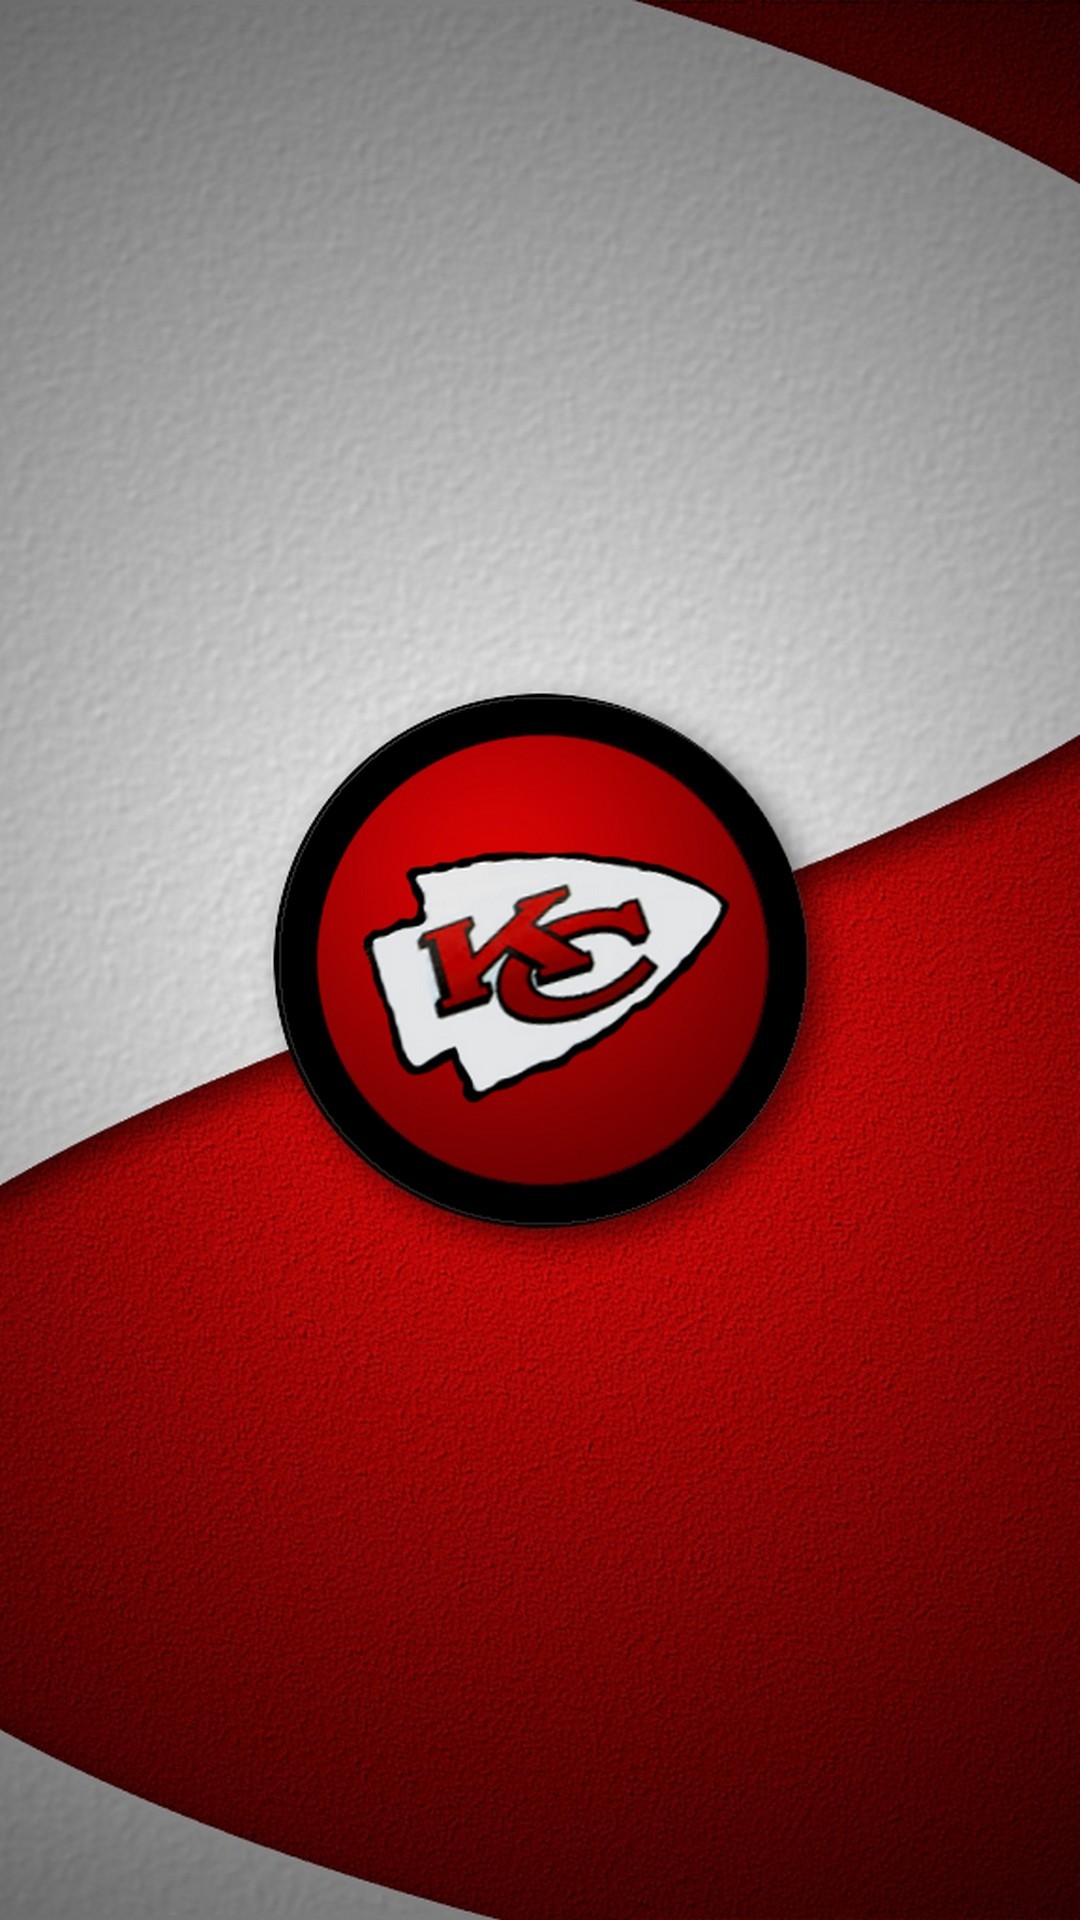 Kansas City Chiefs NFL iPhone Lock Screen Wallpaper With high-resolution 1080X1920 pixel. Donwload and set as wallpaper for your iPhone X, iPhone XS home screen backgrounds, XS Max, XR, iPhone8 lock screen wallpaper, iPhone 7, 6, SE, and other mobile devices